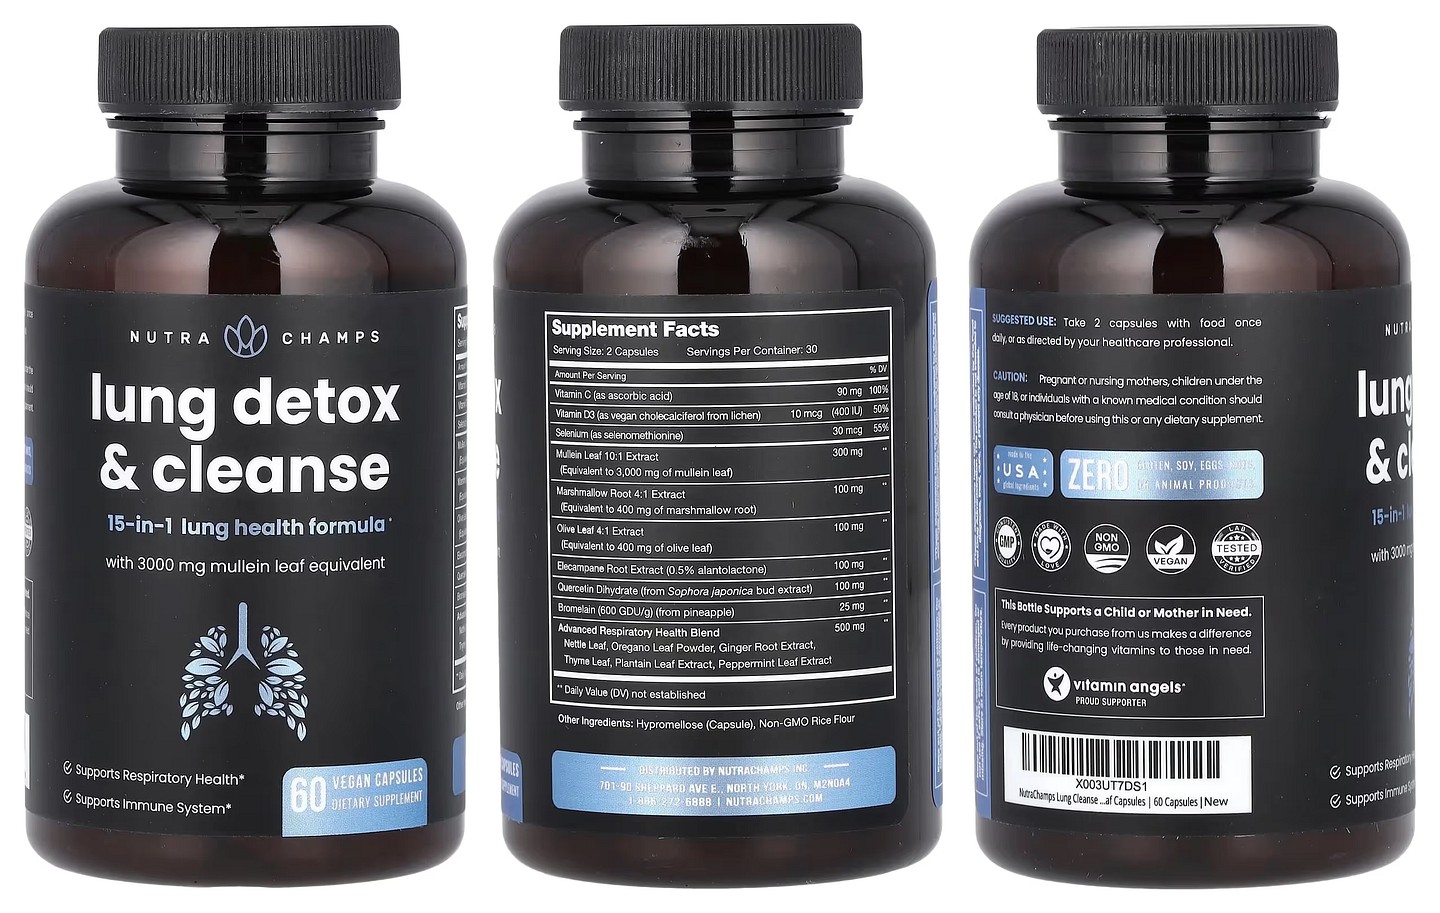 NutraChamps, Lung Detox & Cleanse packaging